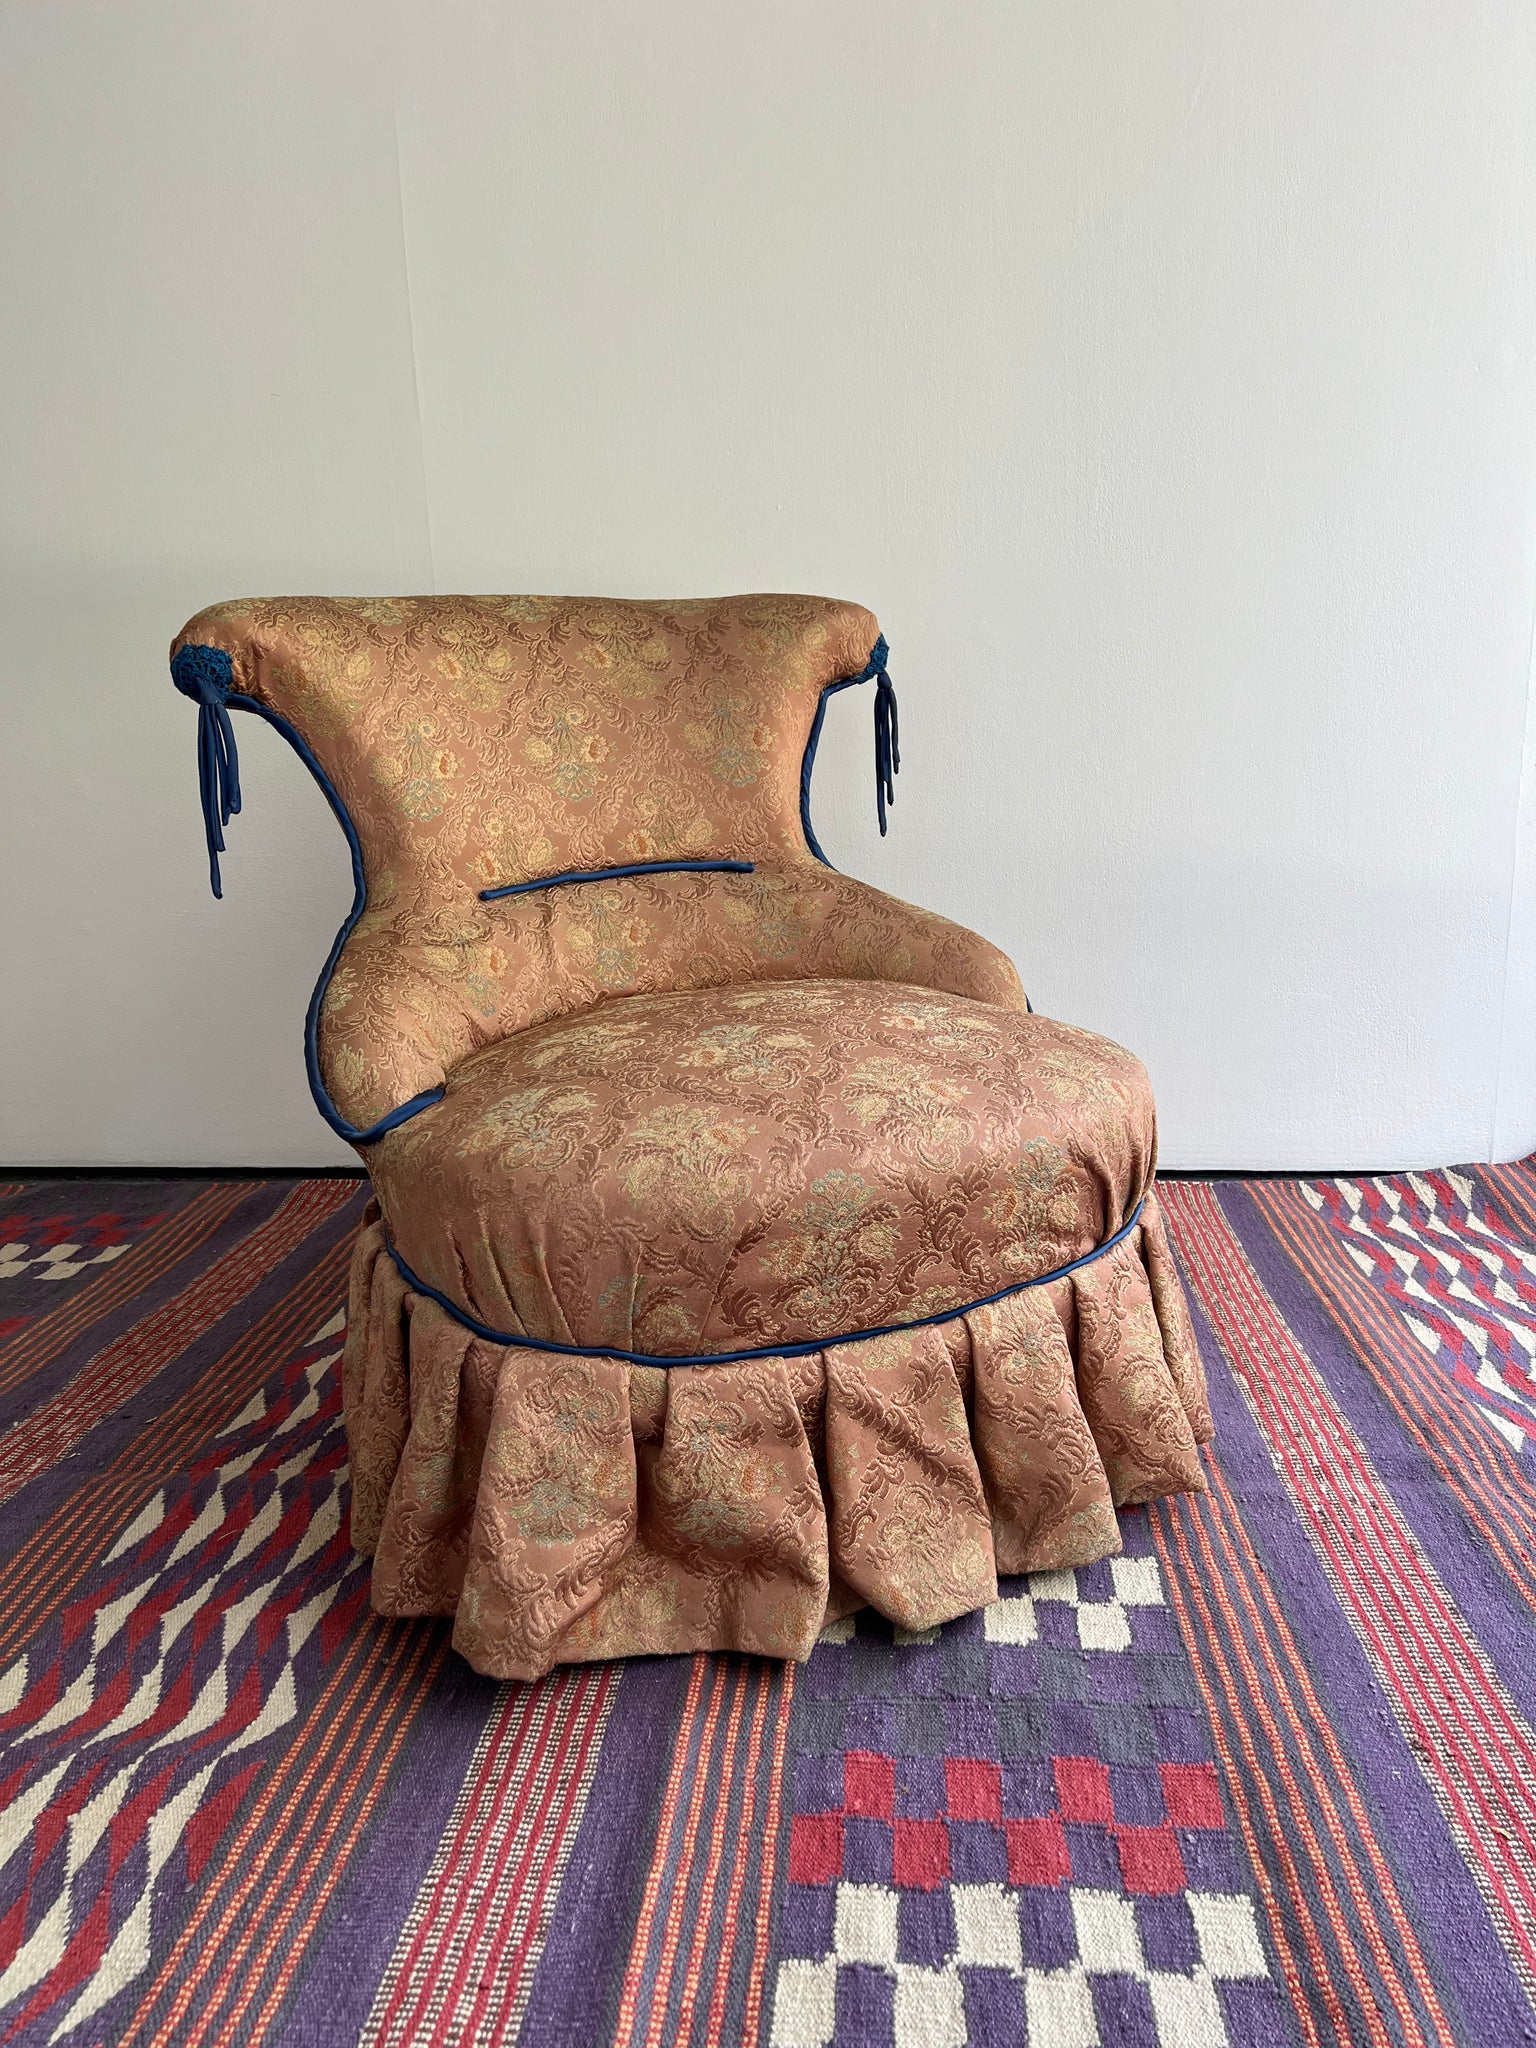 Pink Chinoiserie and Blue Tassle Slipper Chair